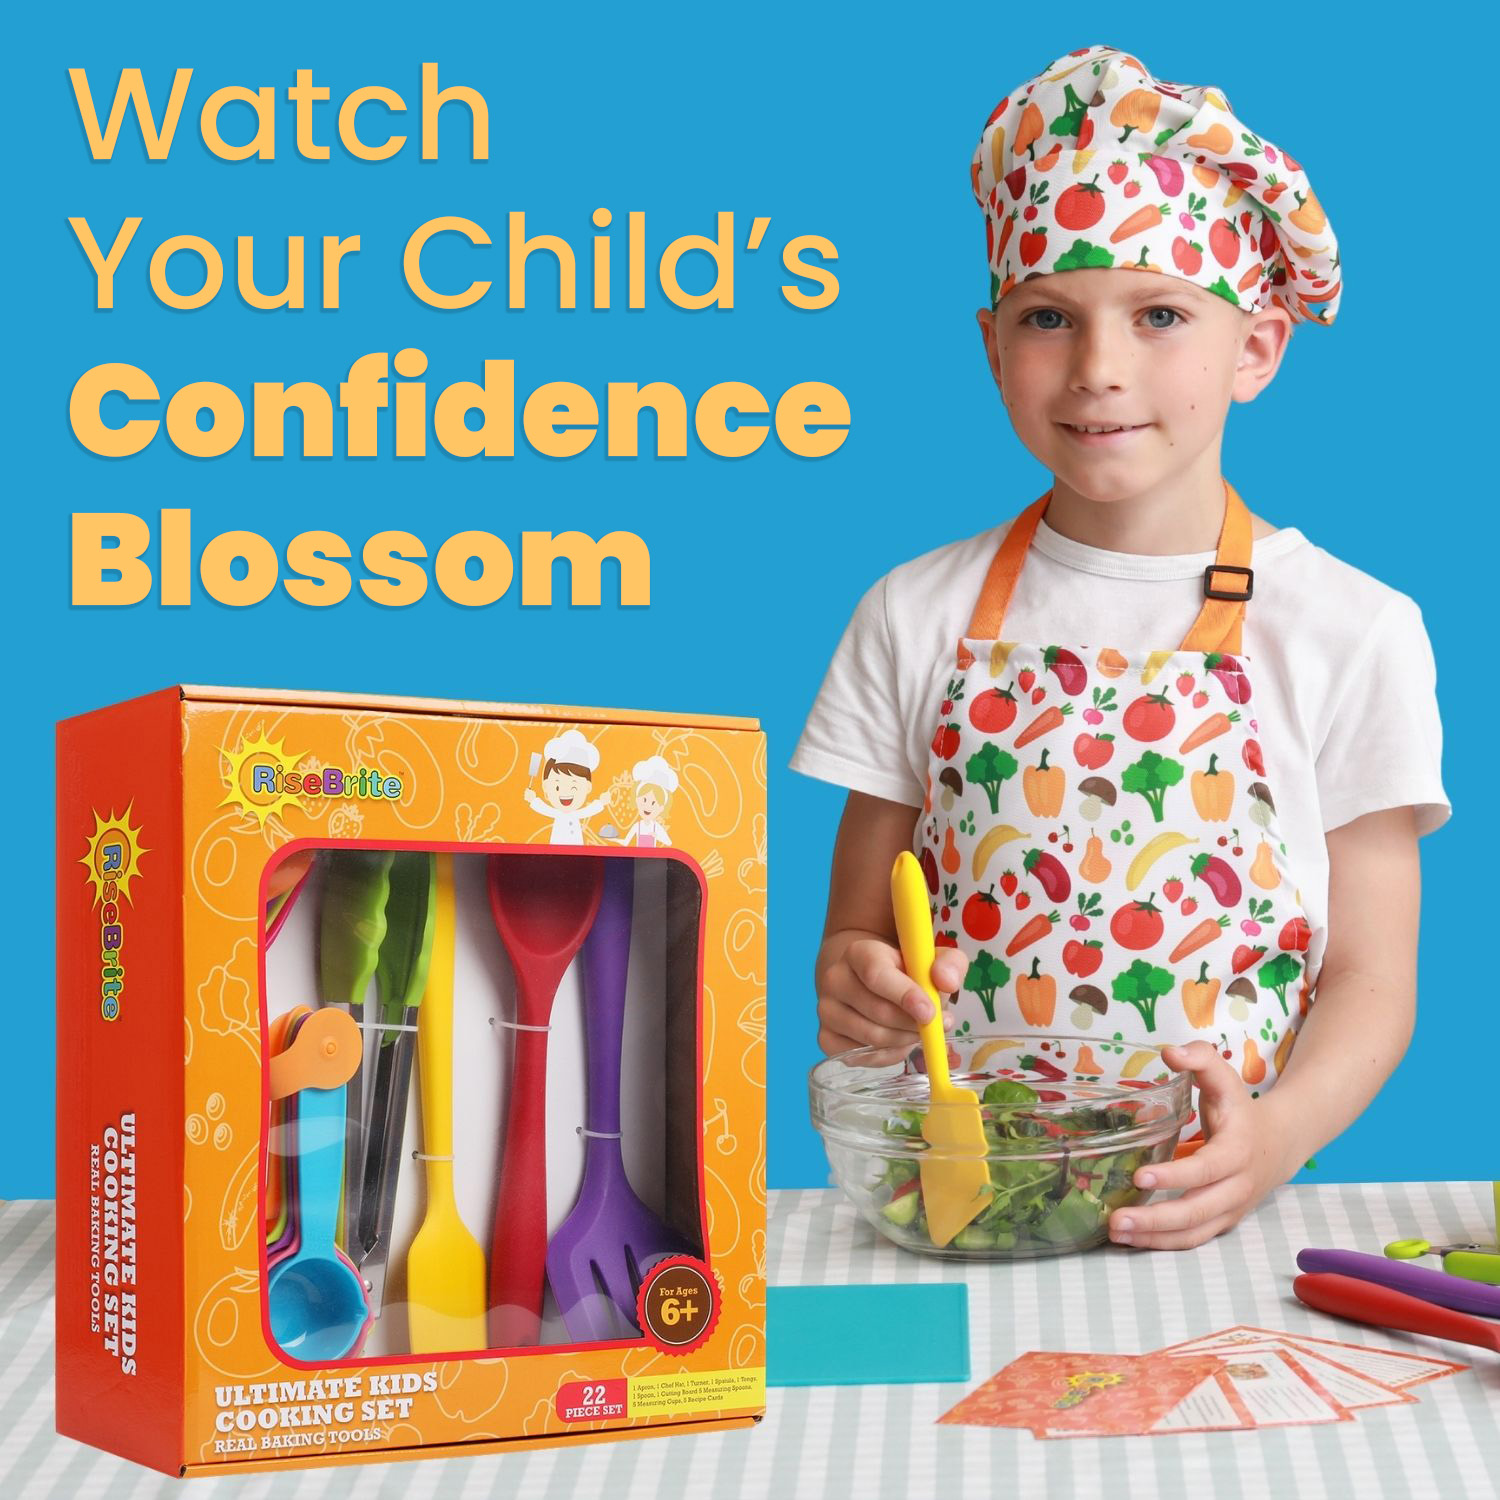 RiseBrite Real Kids Cooking Set With Vegetable Apron - Watch You Child's Creativity Blossom!